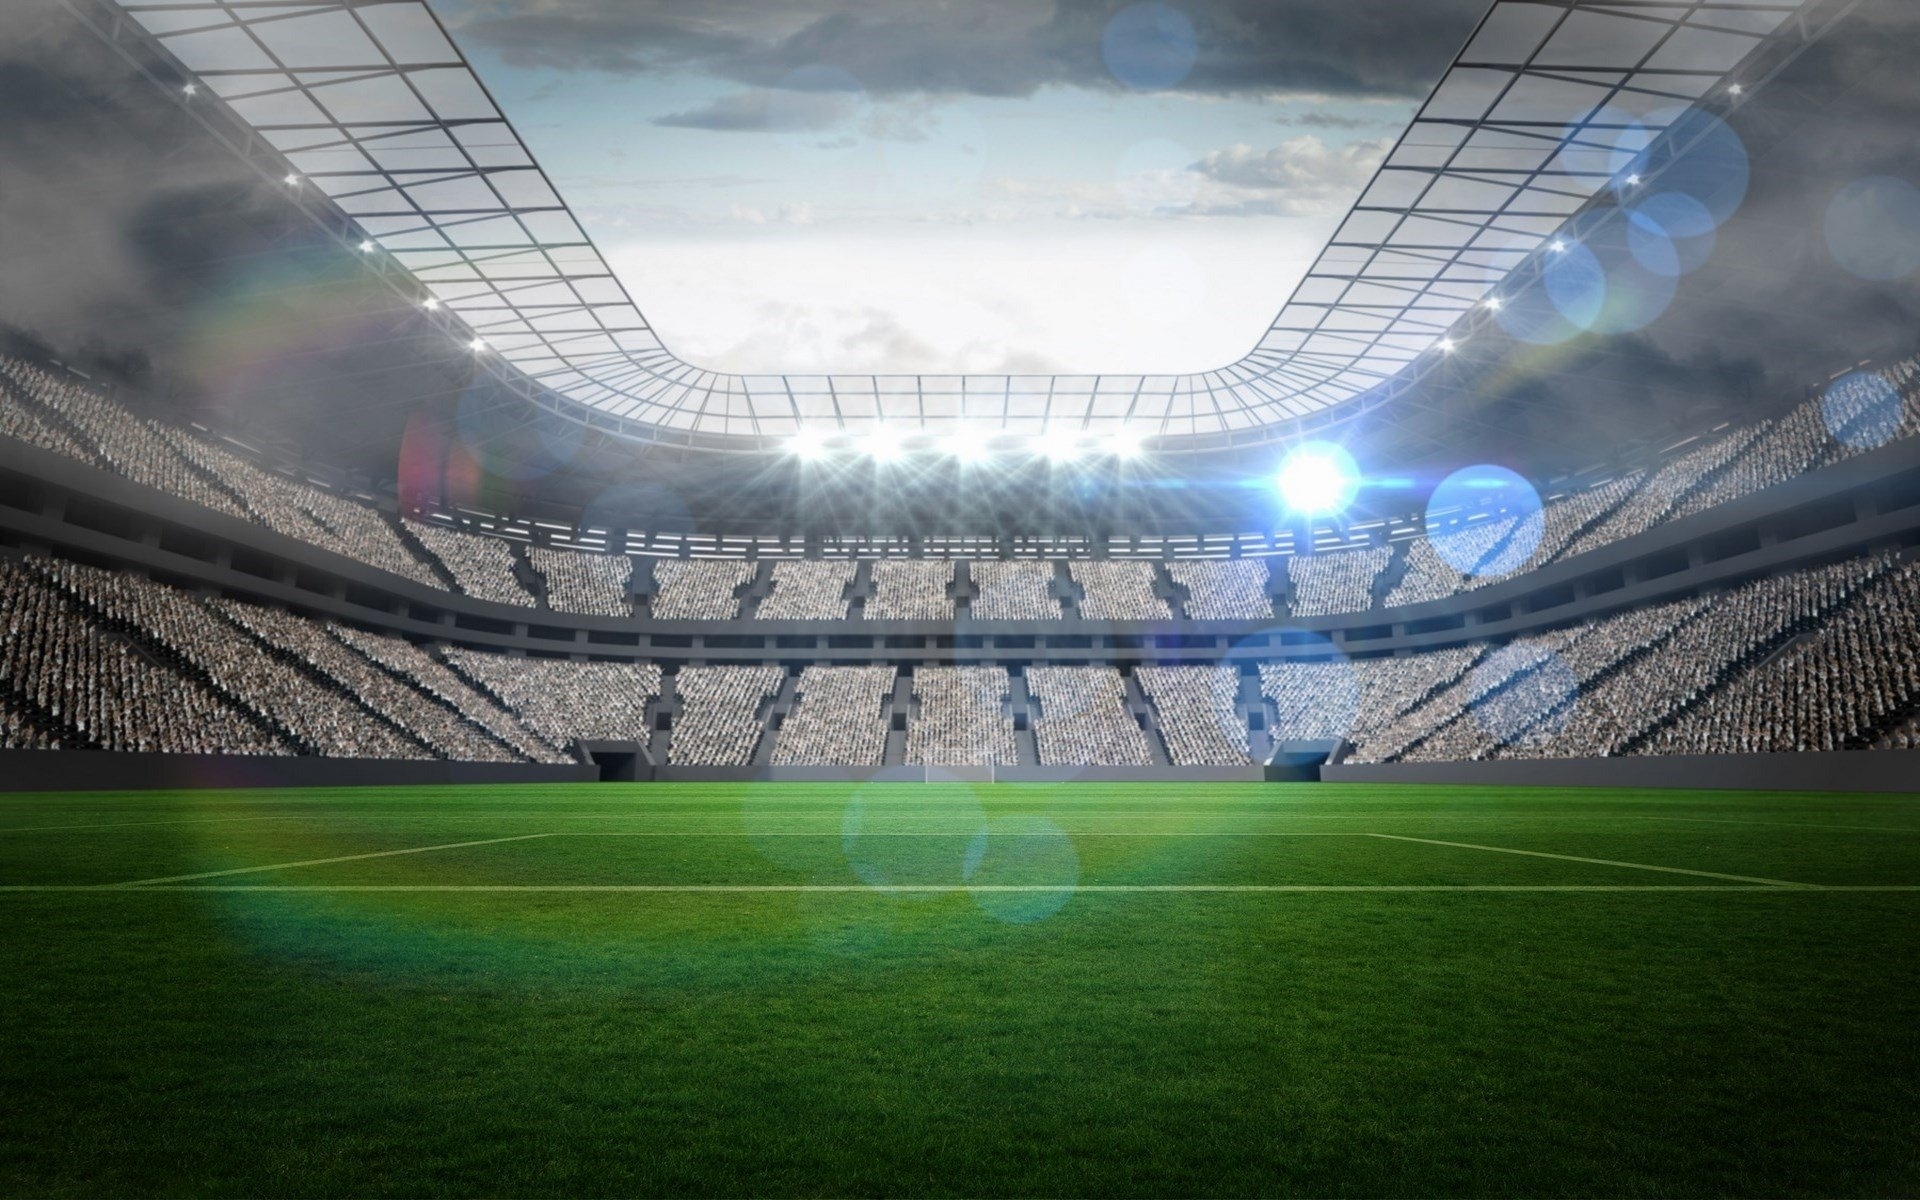 10 Top Football Stadium Background Hd FULL HD 1920×1080 For PC Background